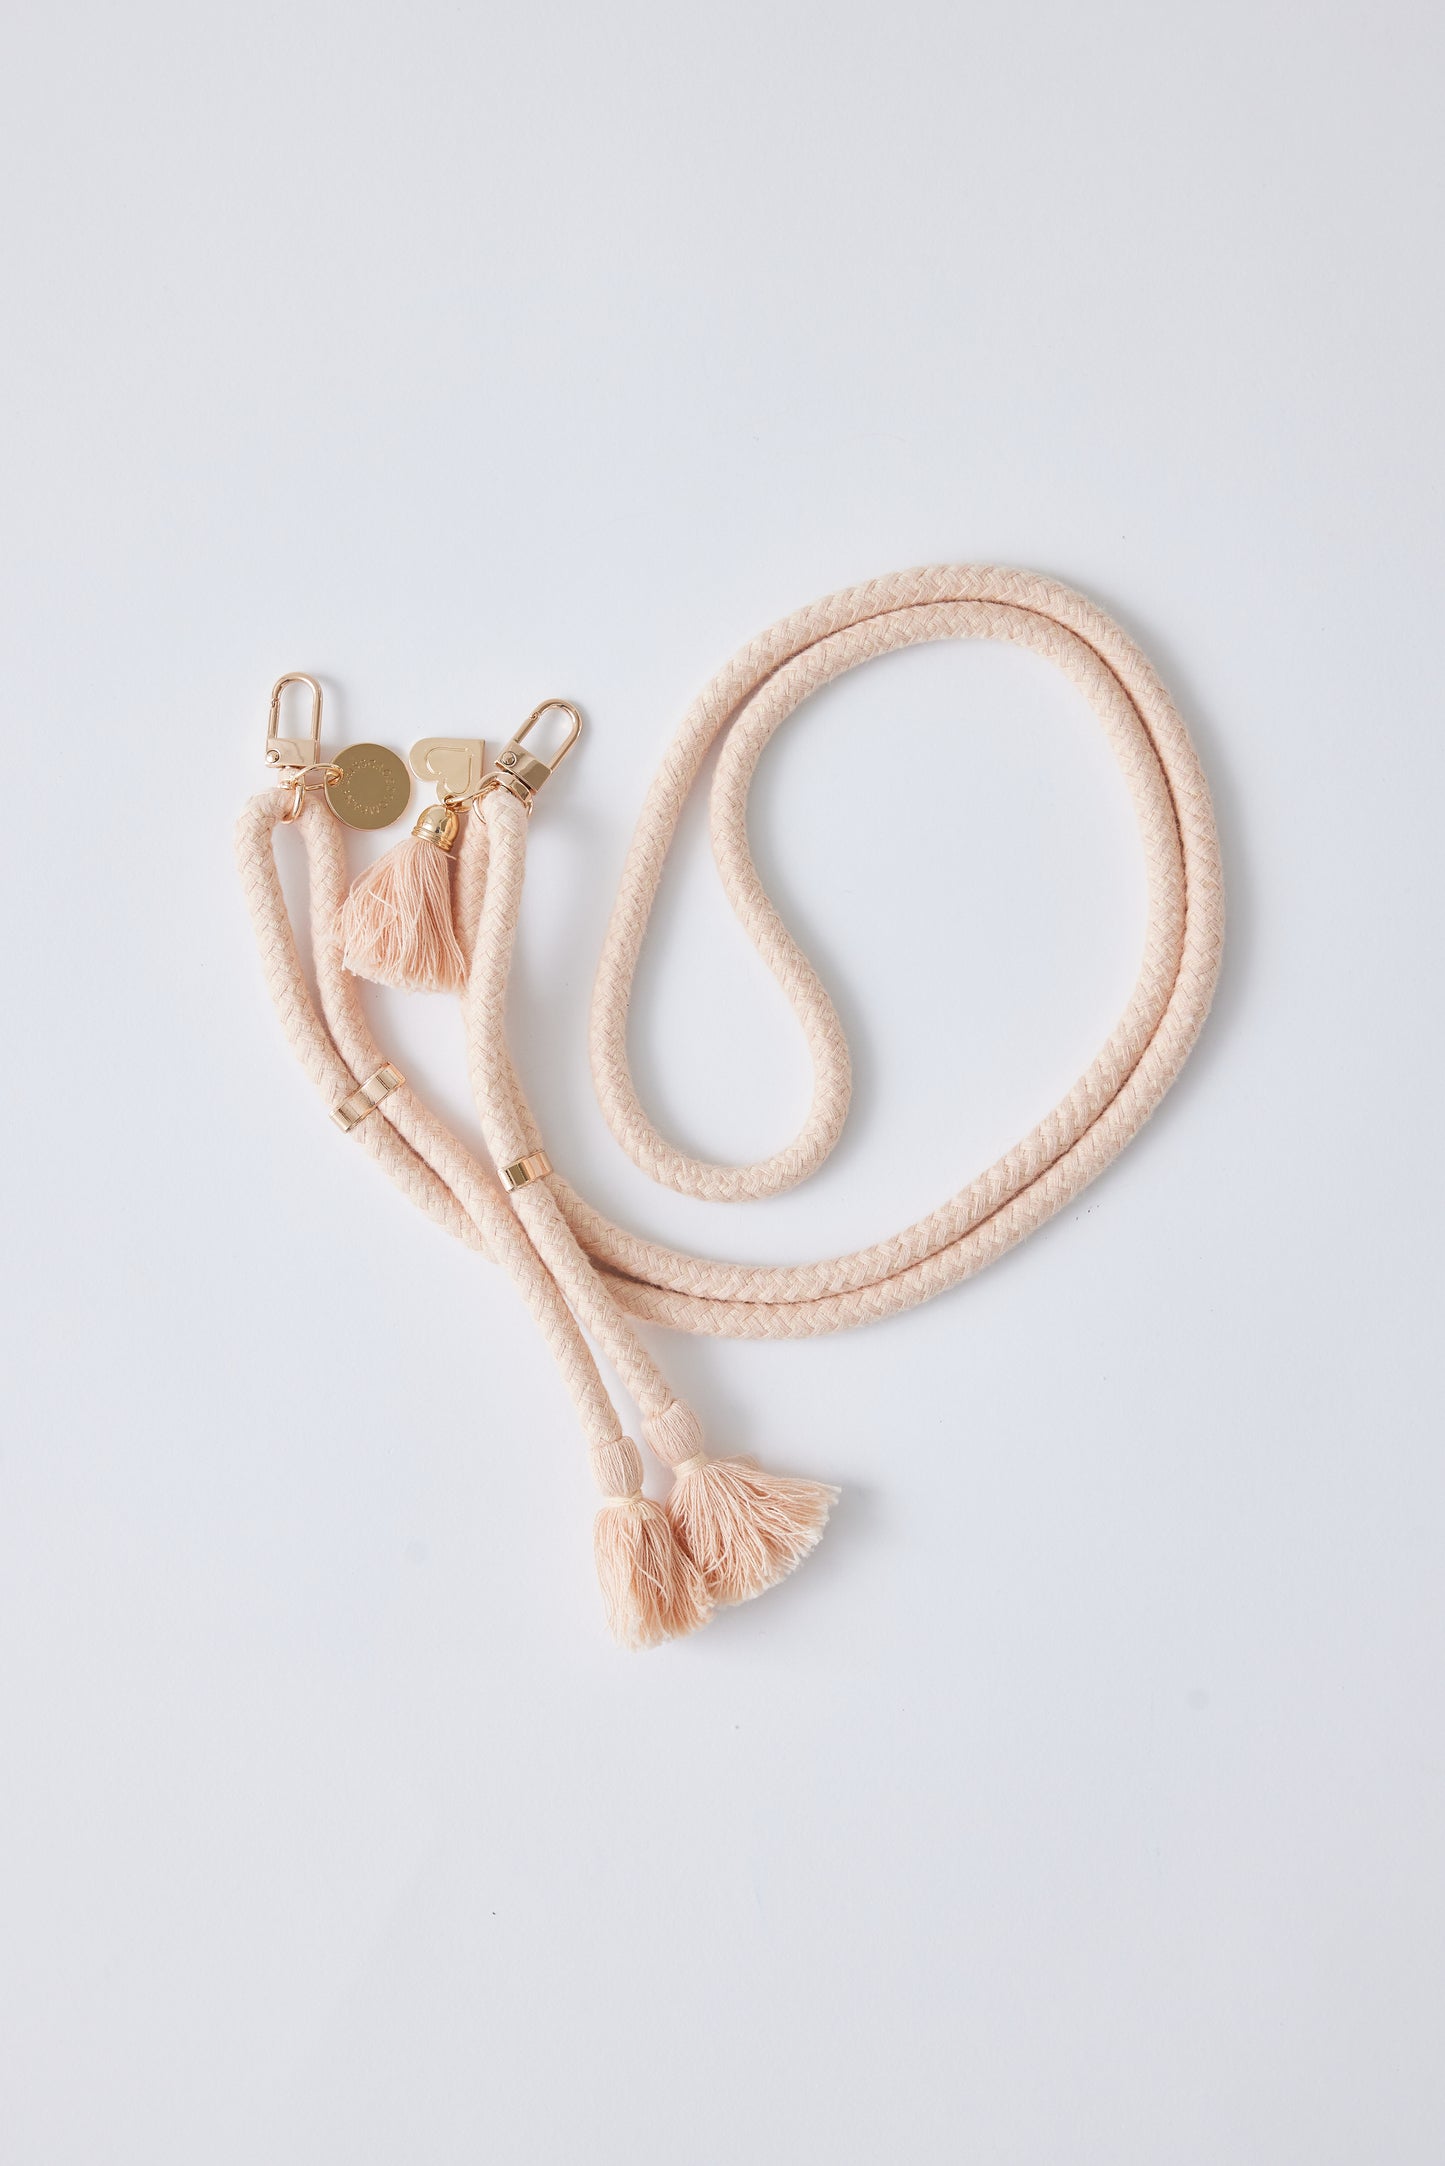 Cotton Phone Straps - with double carabiners, detachable